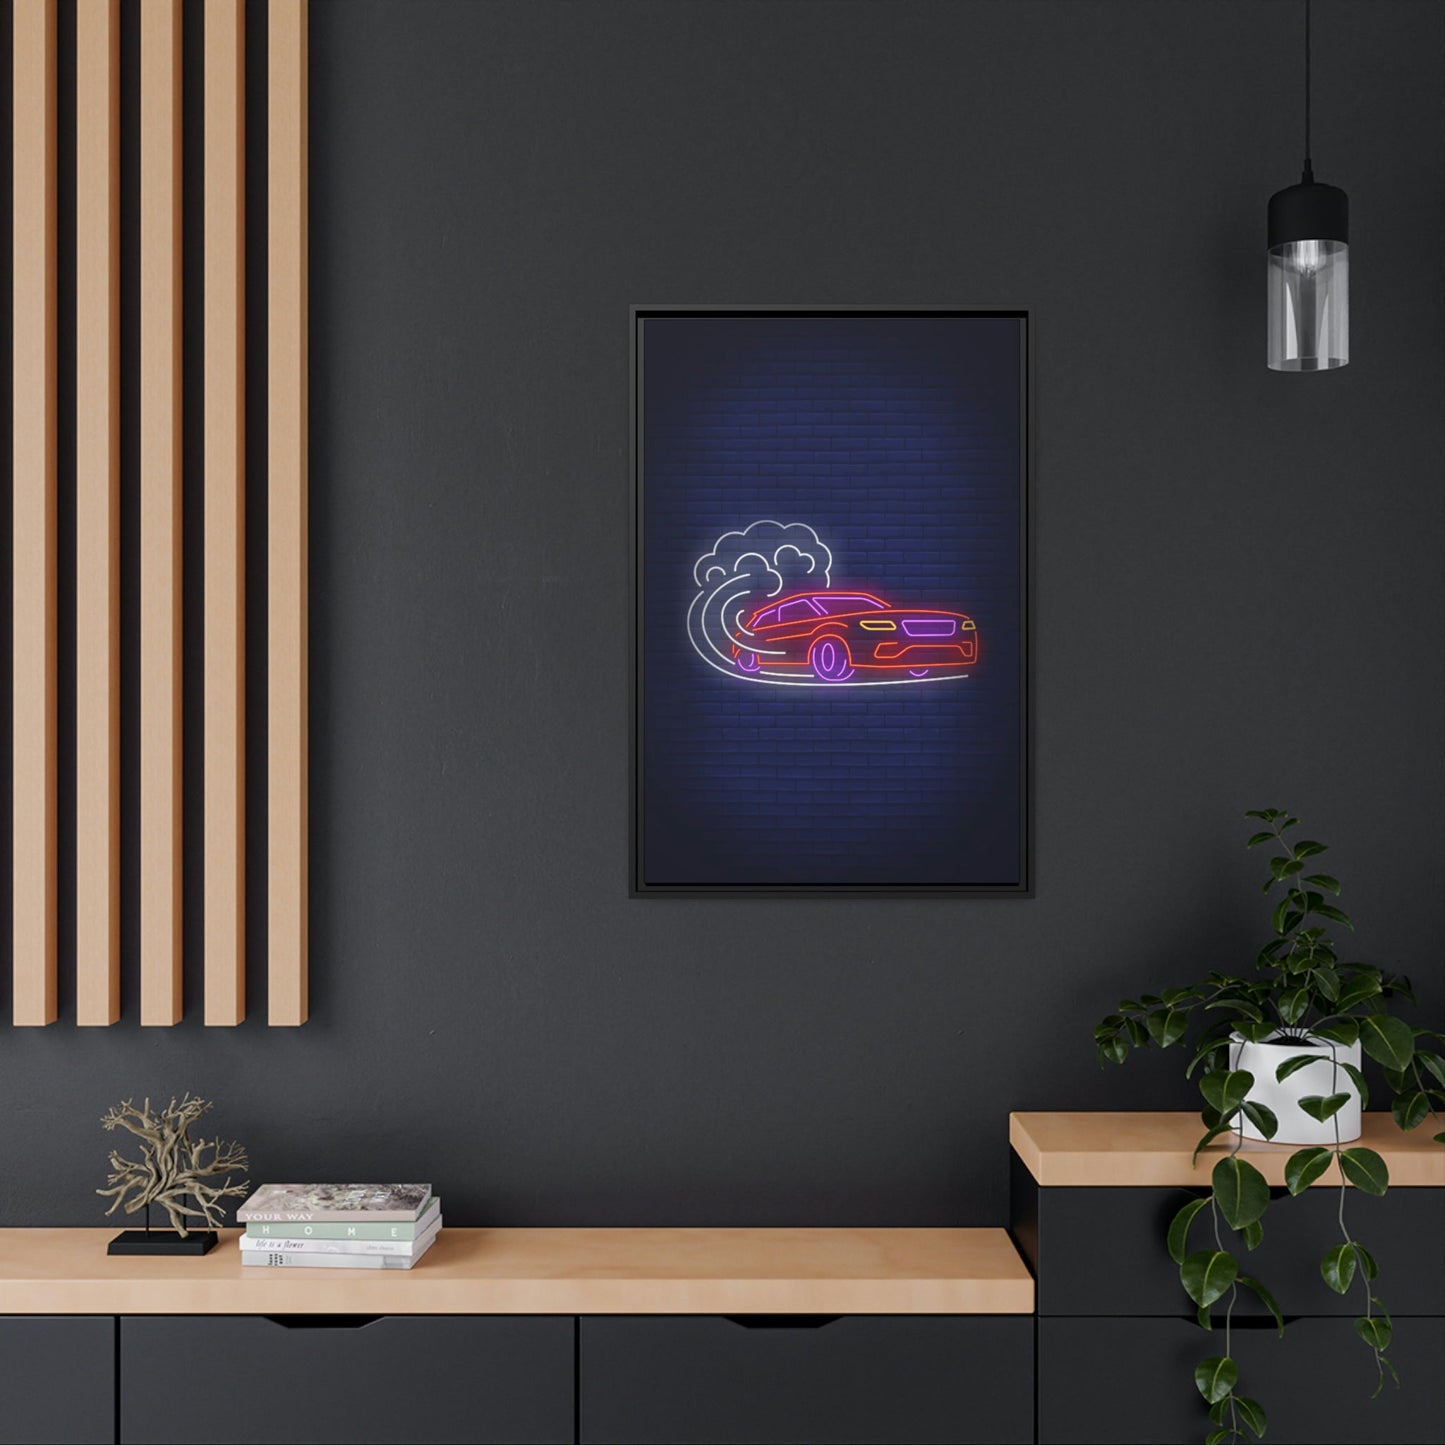 Enchanted by Neon Nights: Premium Canvas Prints for Exquisite Wall Decor